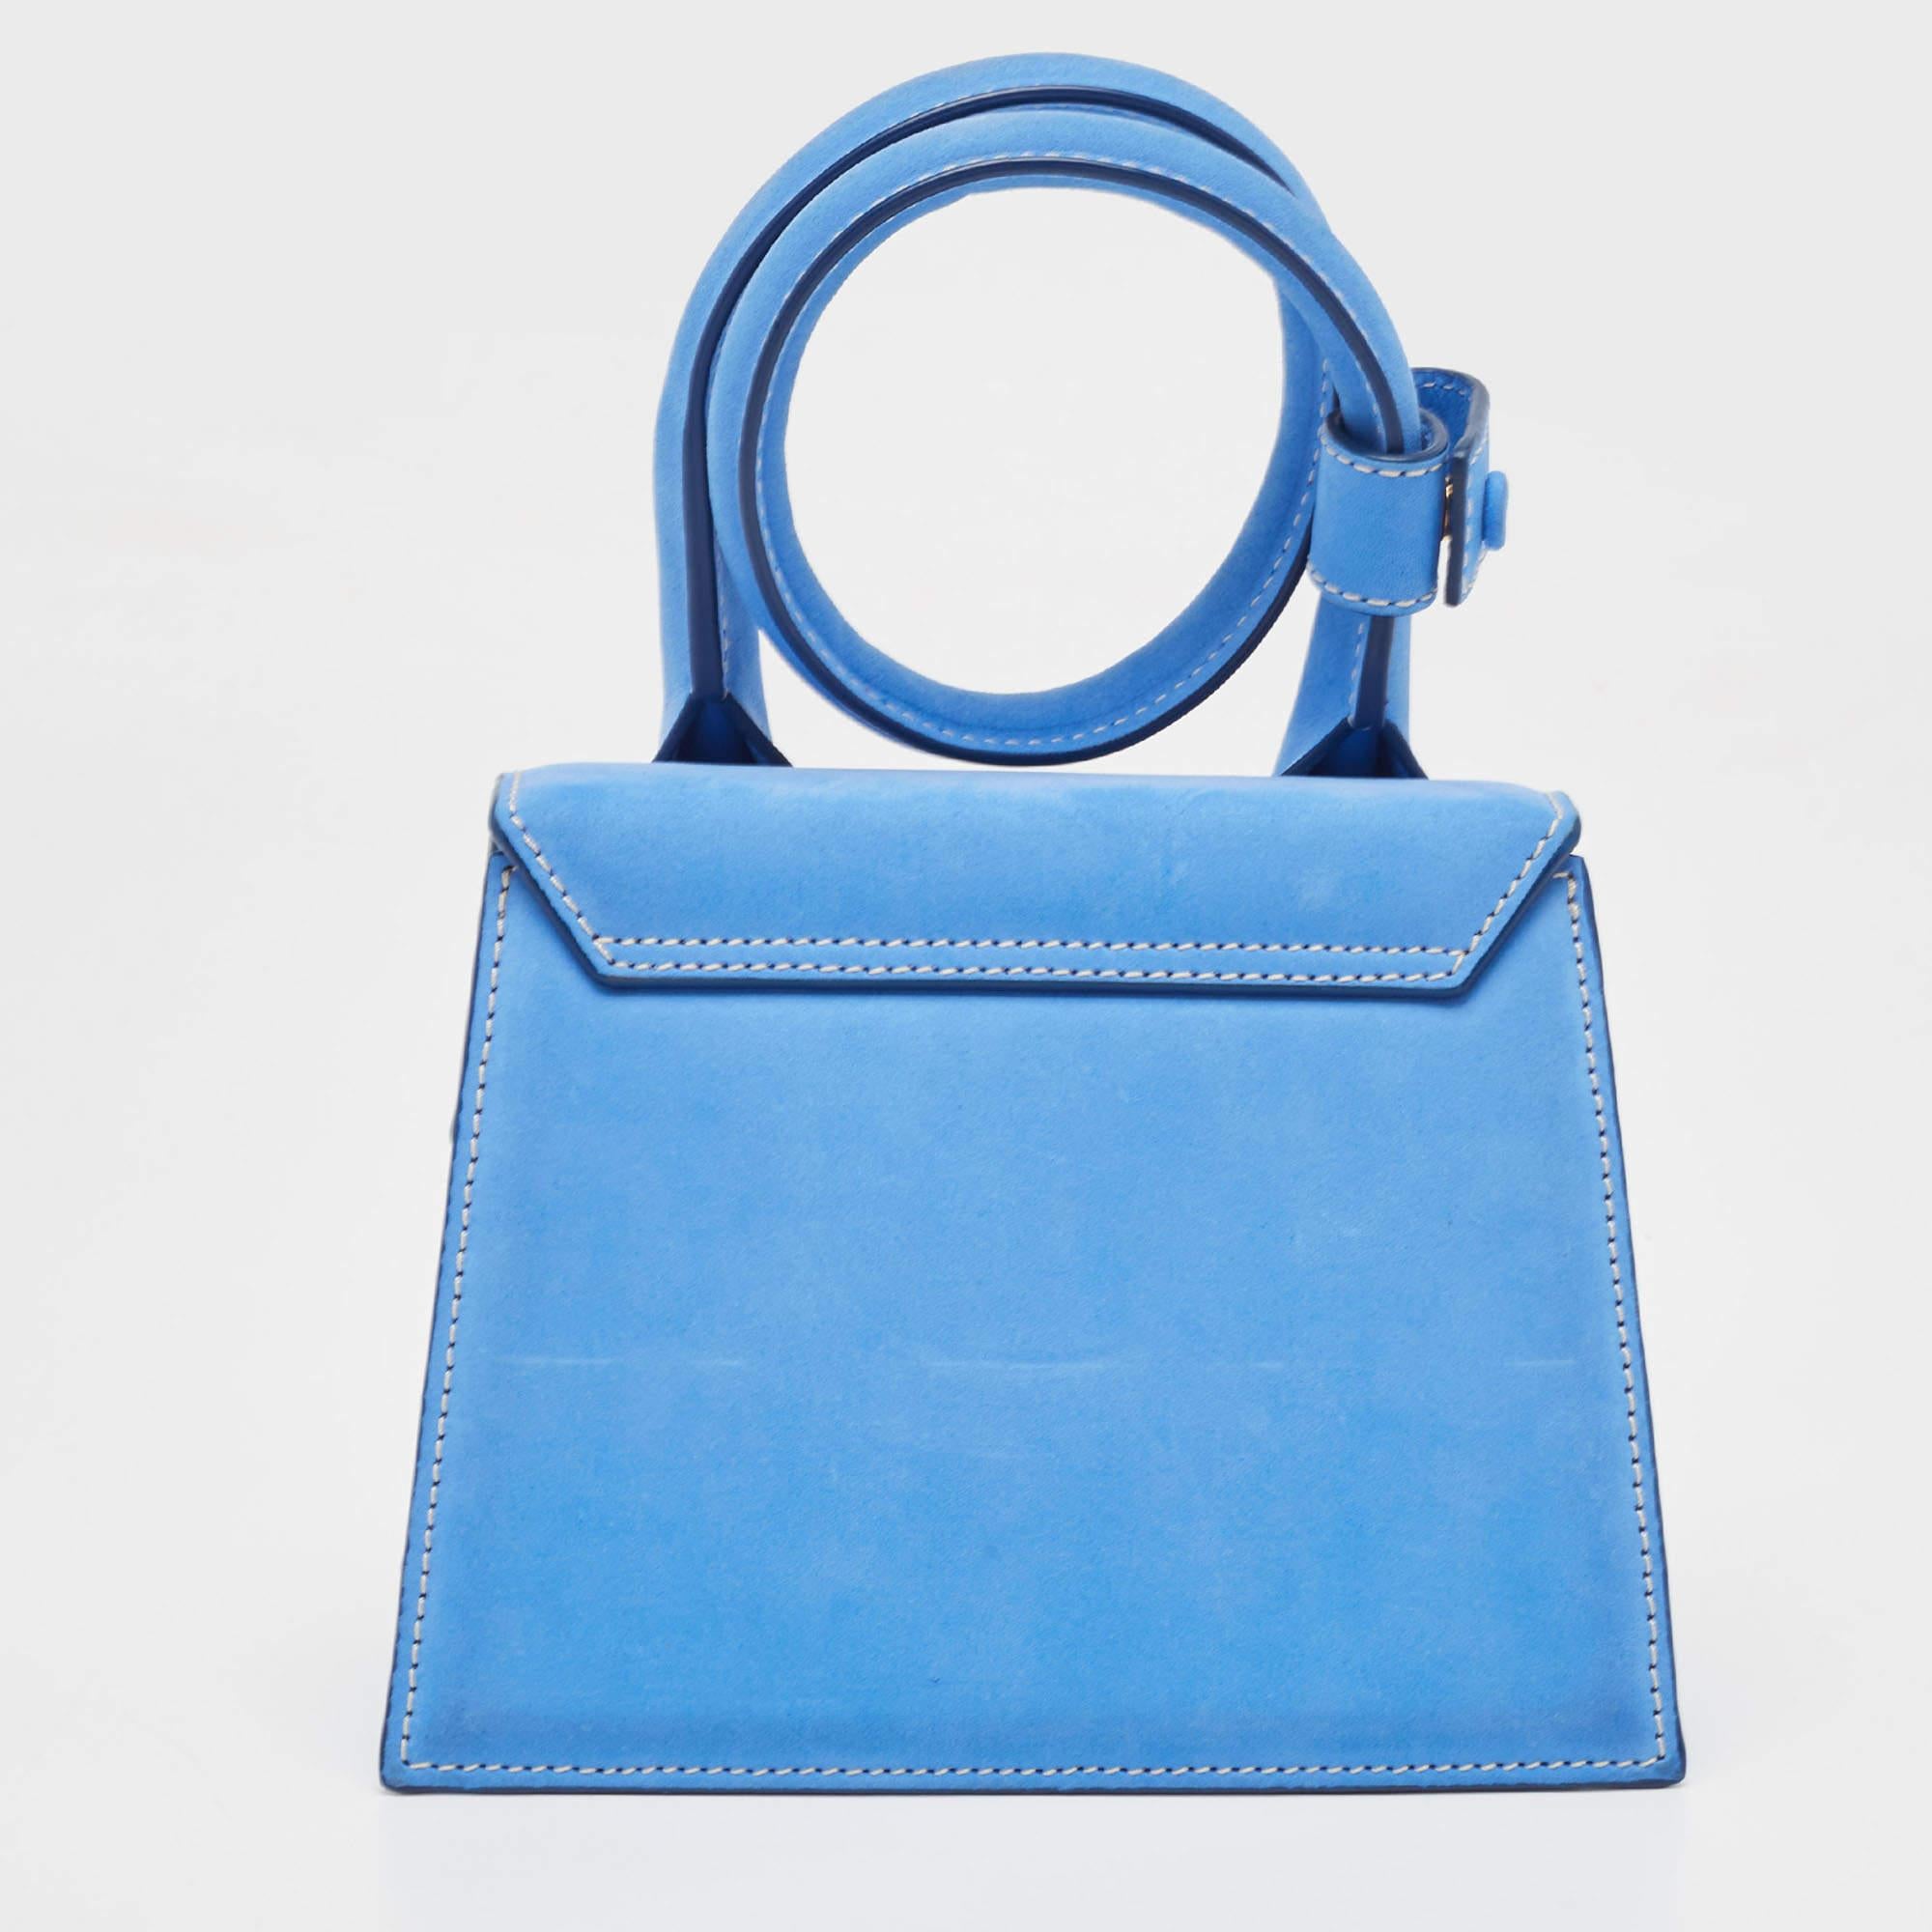 Chances are that you have already noticed this bag on your social media feeds carried by influencers and celebrities. A cult-favorite piece, this Jacquemus Le Chiquito Noeud bag comes in a structured silhouette and has a rolled handle. The creation